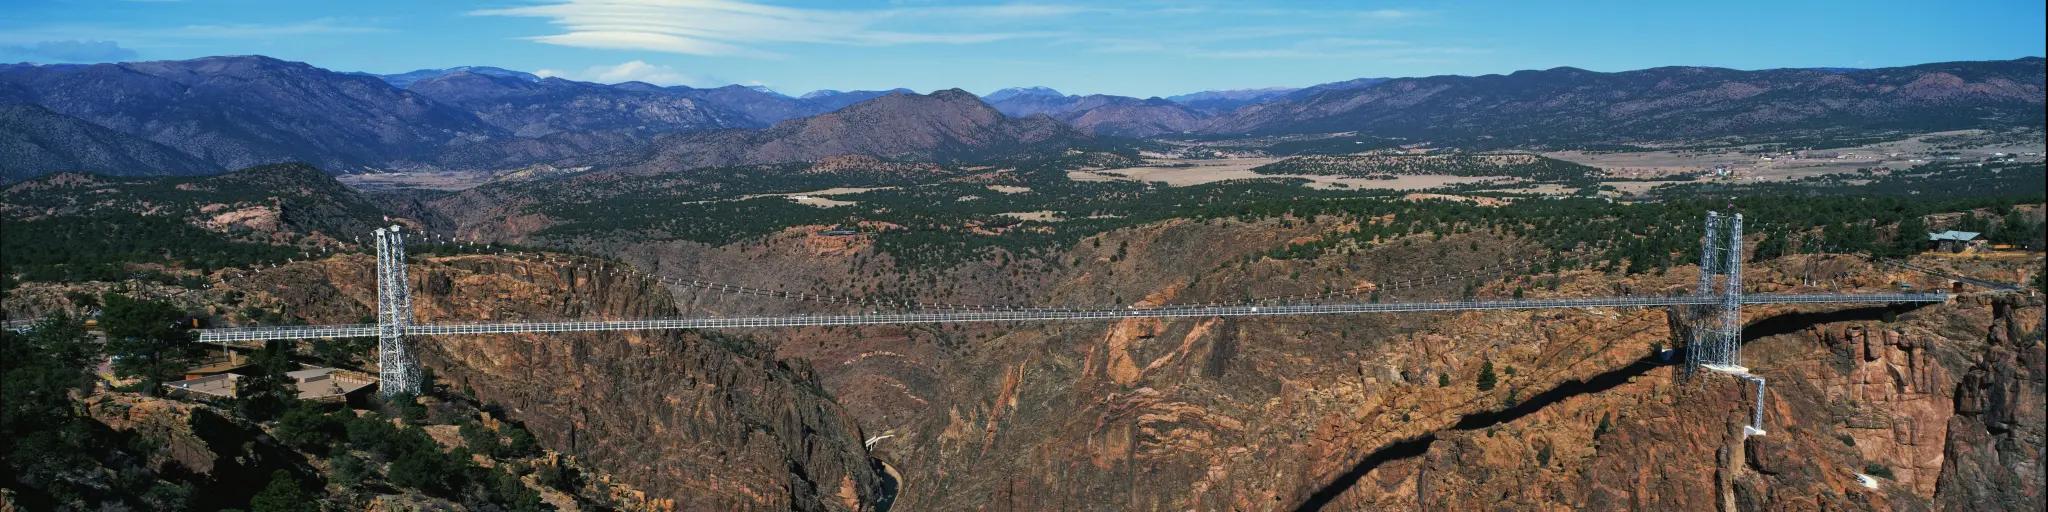 Panoramic view of the Royal Gorge Bridge, the largest suspension bridge in the USA, on a sunny day with blue sky above